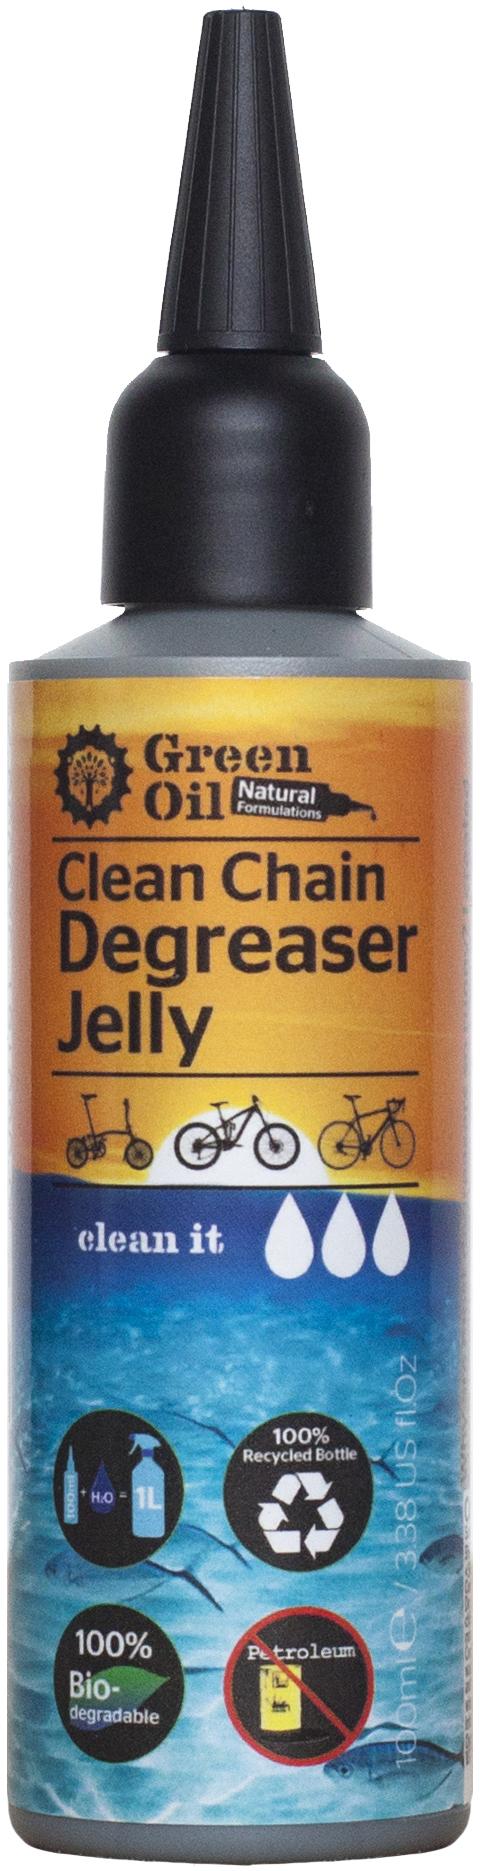 Green Oil Clean Chain Degreaser - Transparent